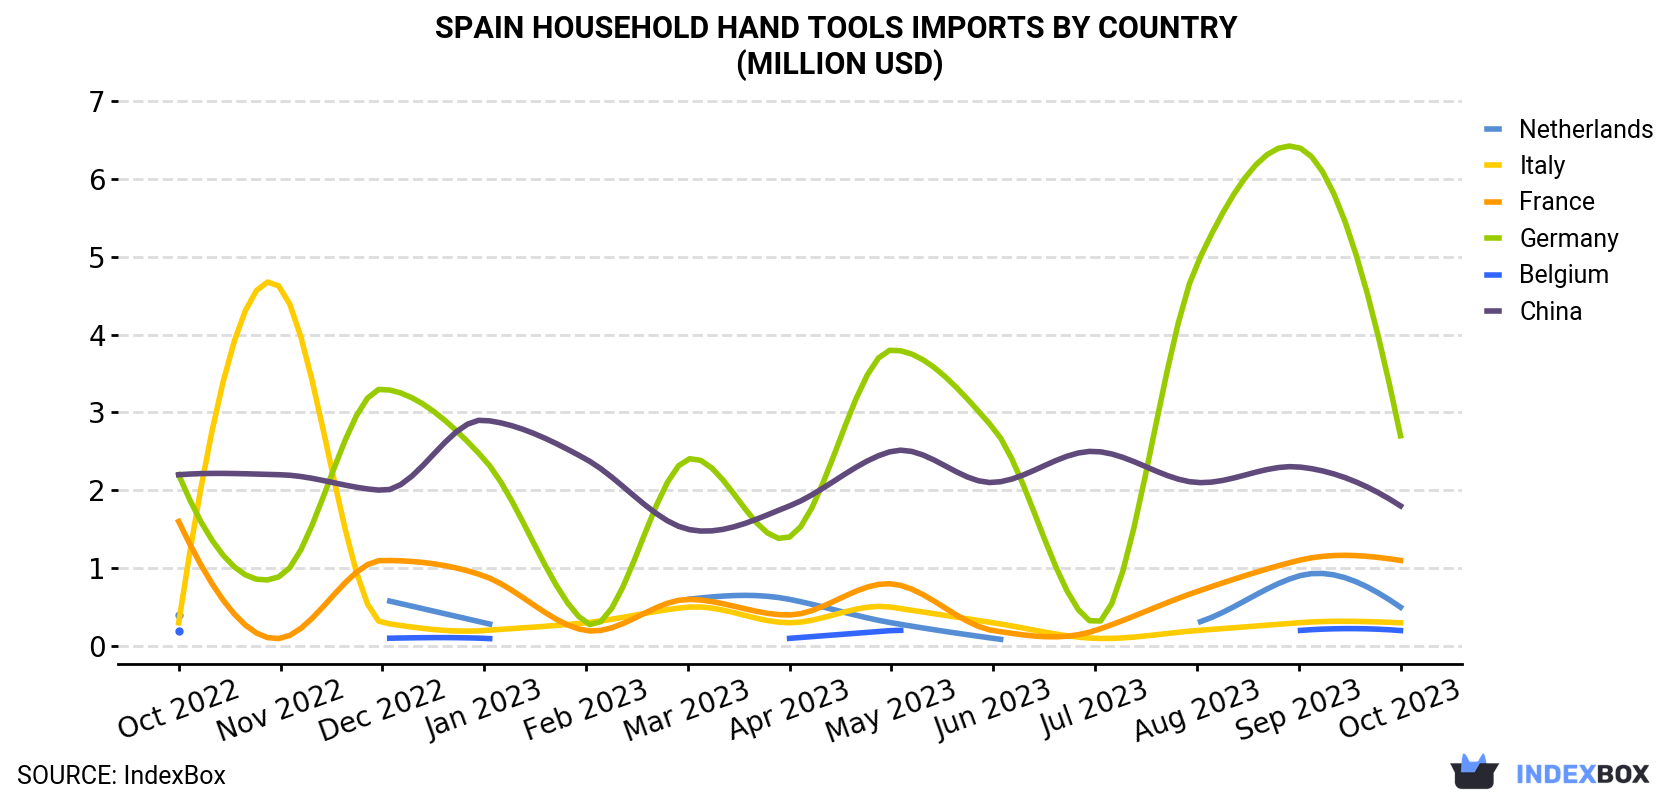 Spain Household Hand Tools Imports By Country (Million USD)